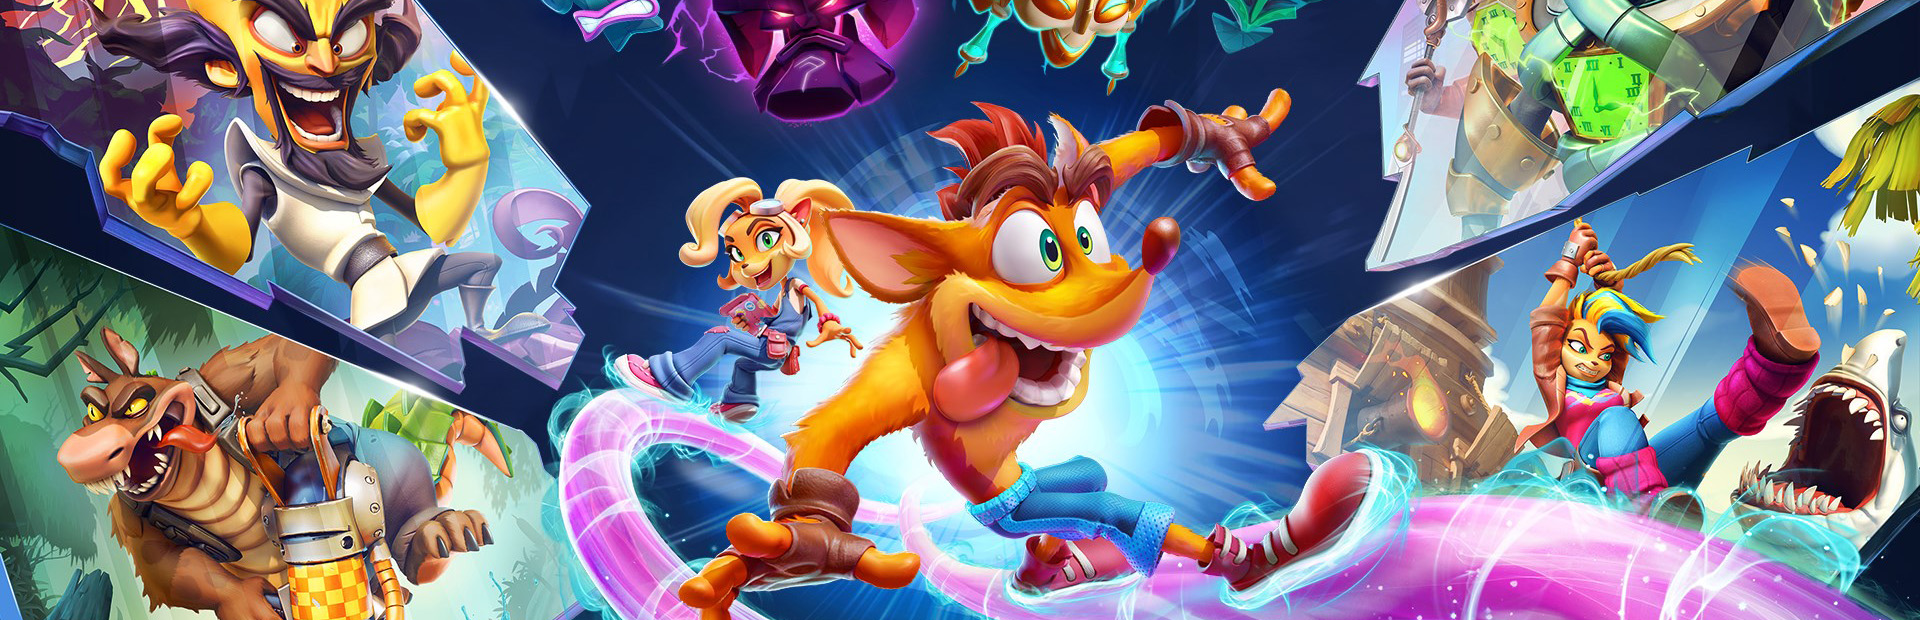 Crash bandicoot it s about time steam фото 109